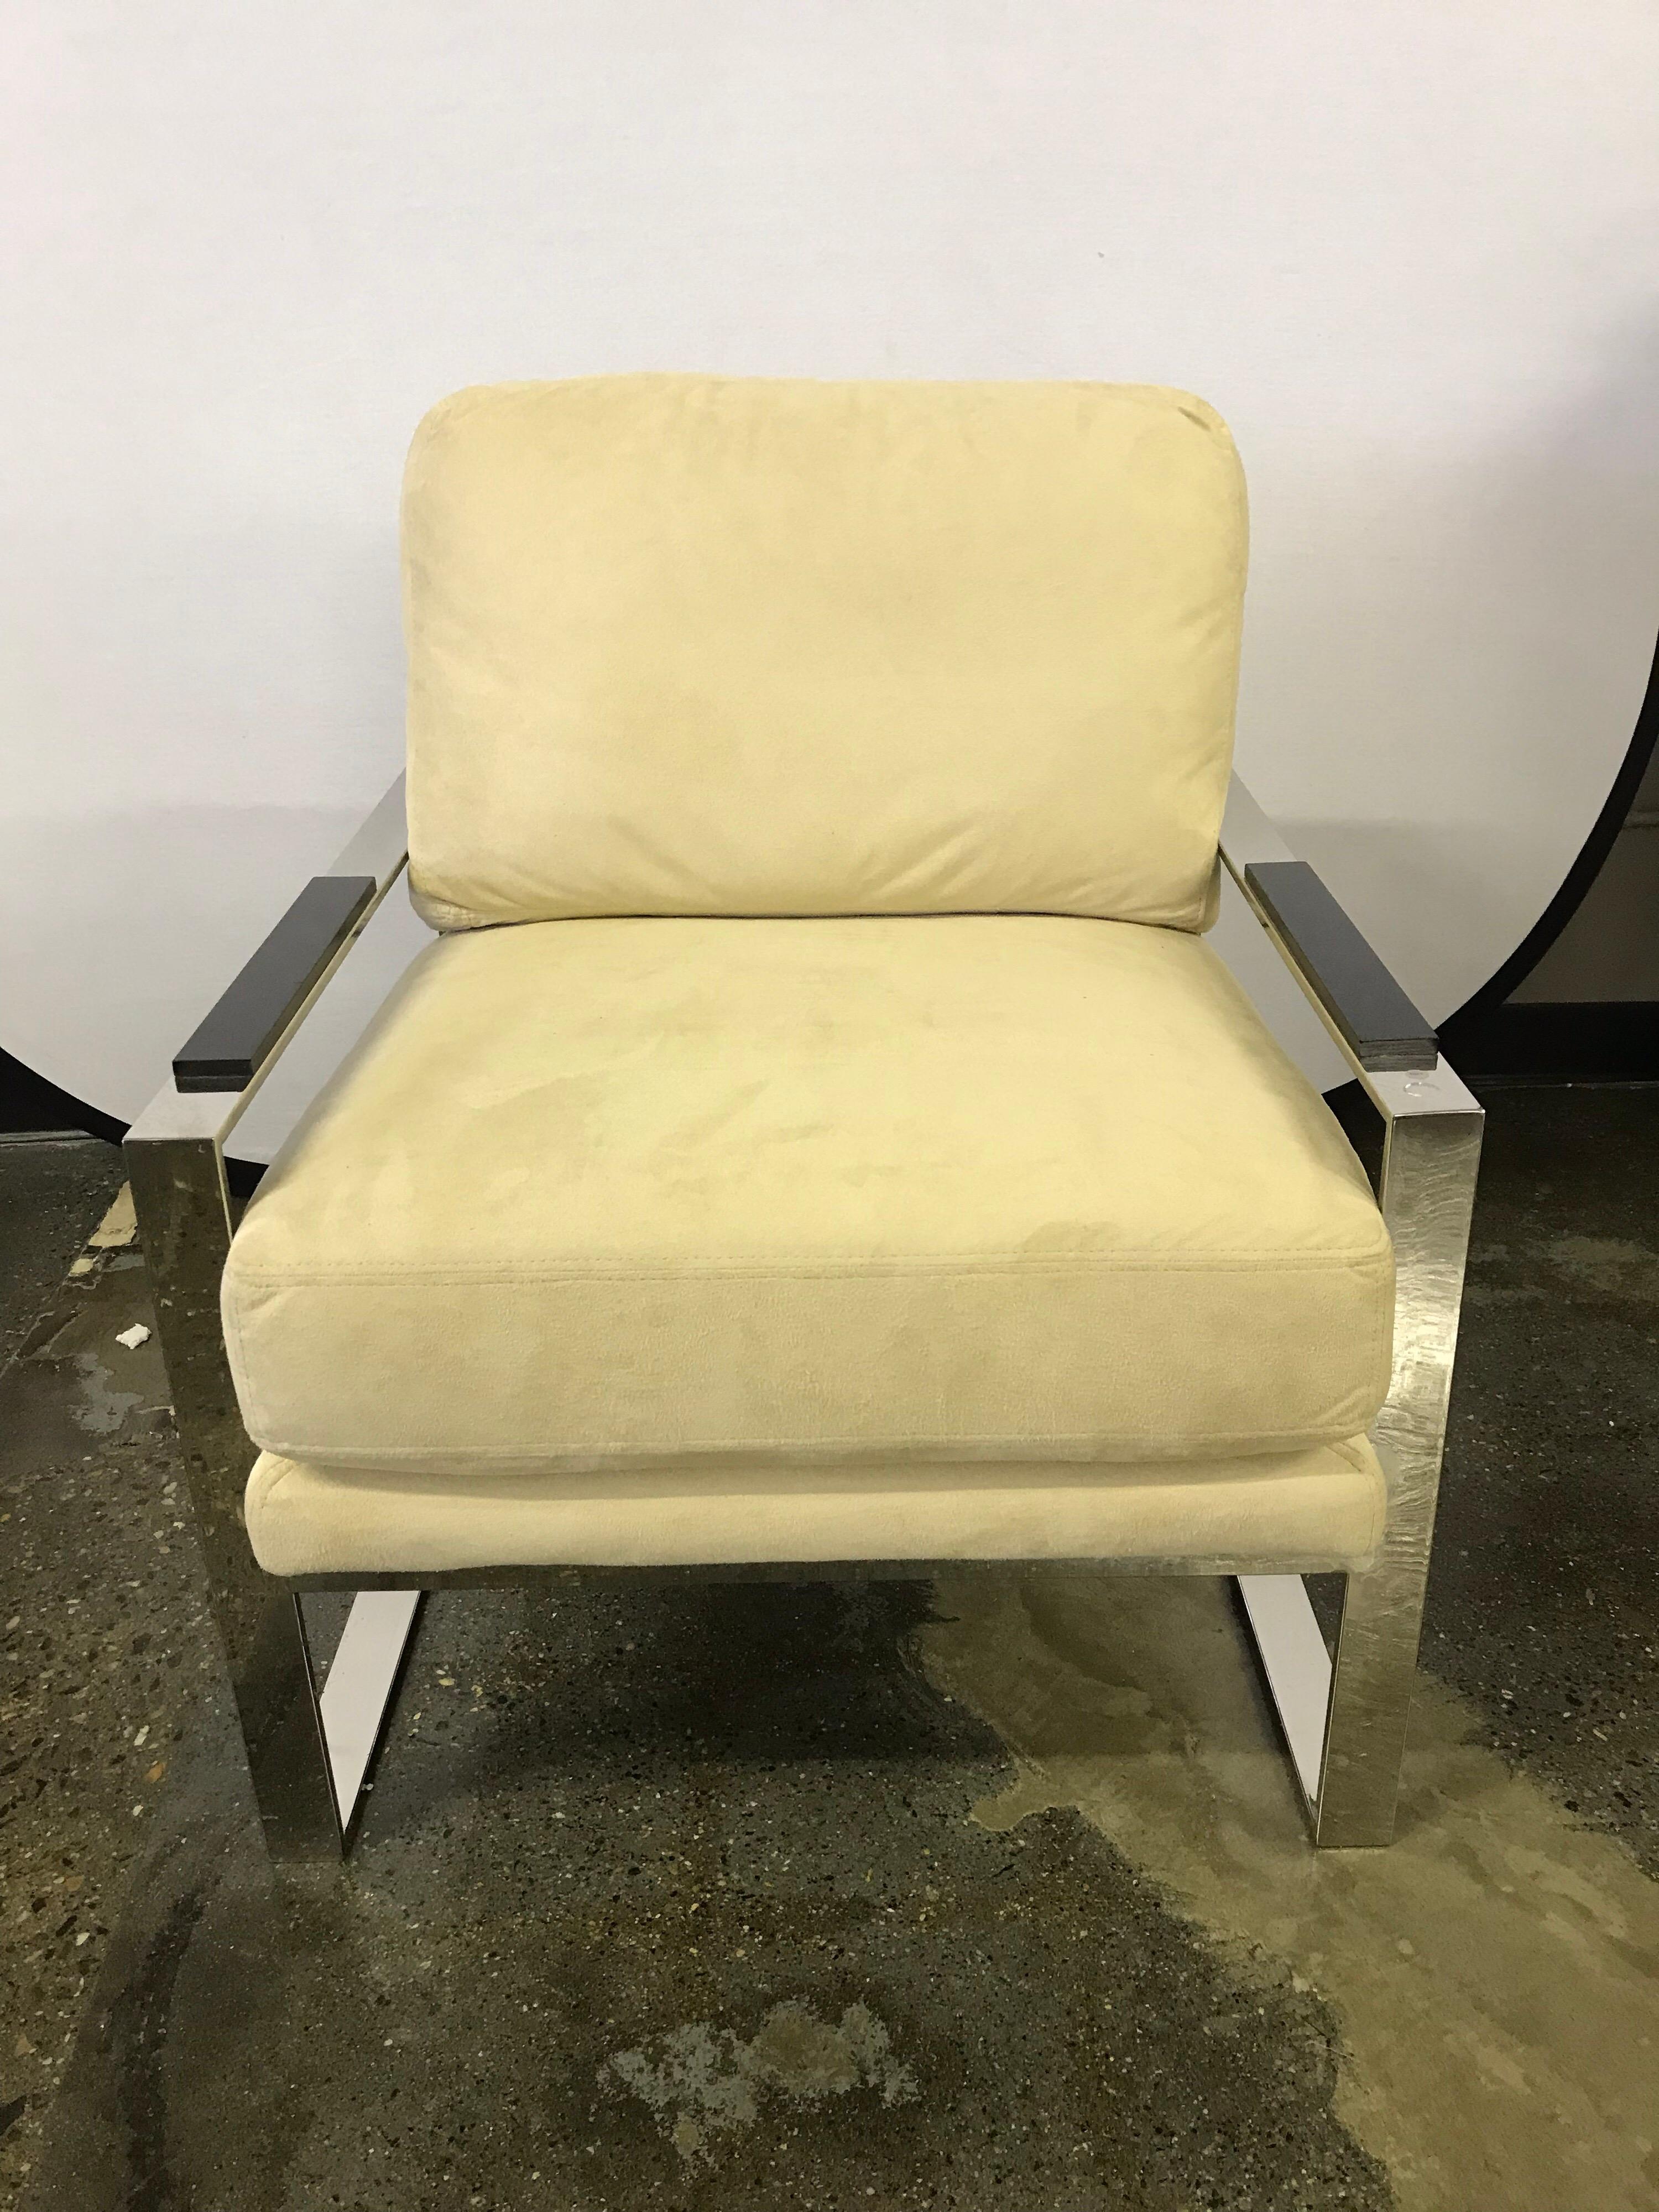 Mid century style chrome cantilevered chair has a deep comfortable seat, a sturdy frame and a wonderful modern aesthetic. Upholstery is pale yellow. 